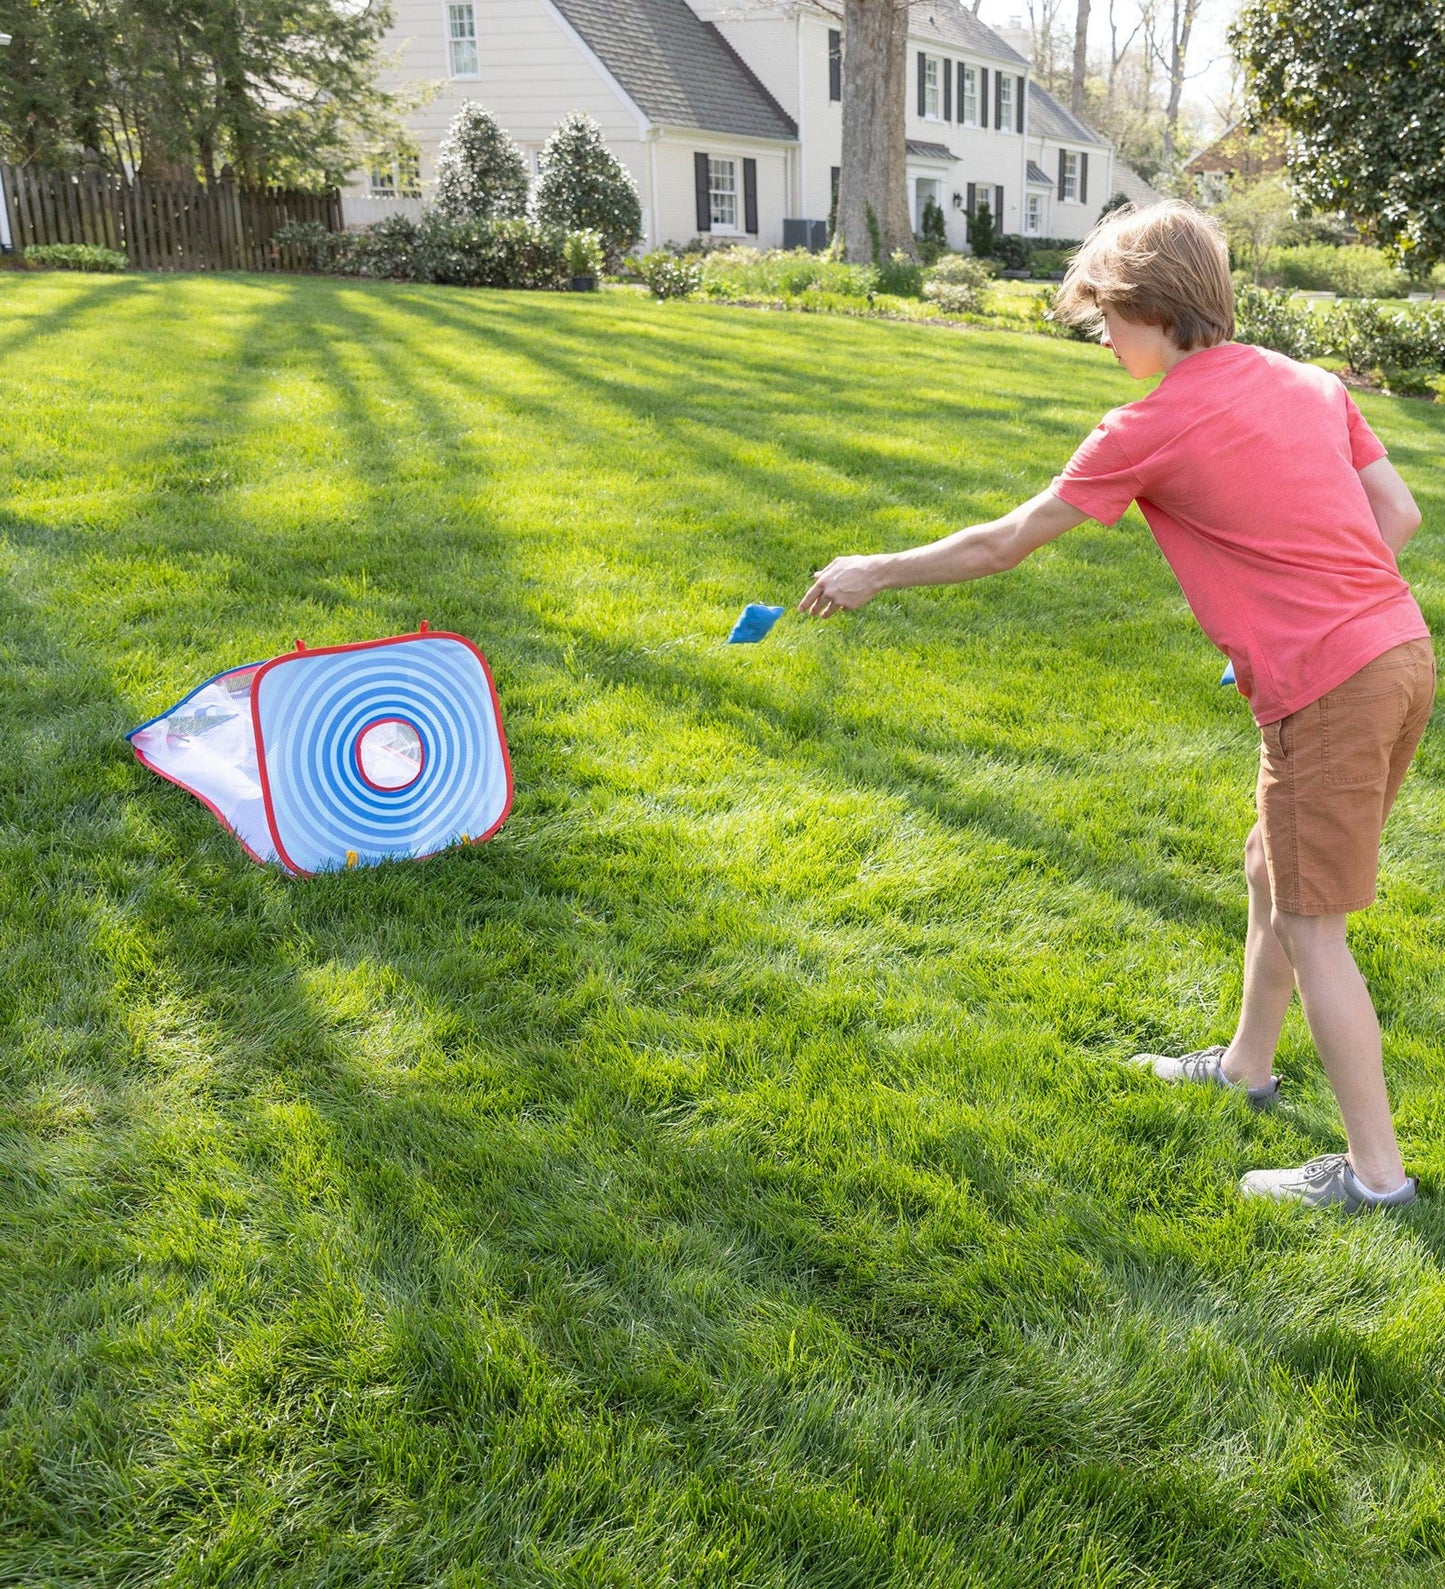 3-in-1 Portable Pop-Up Target Game Set with Bean Bags